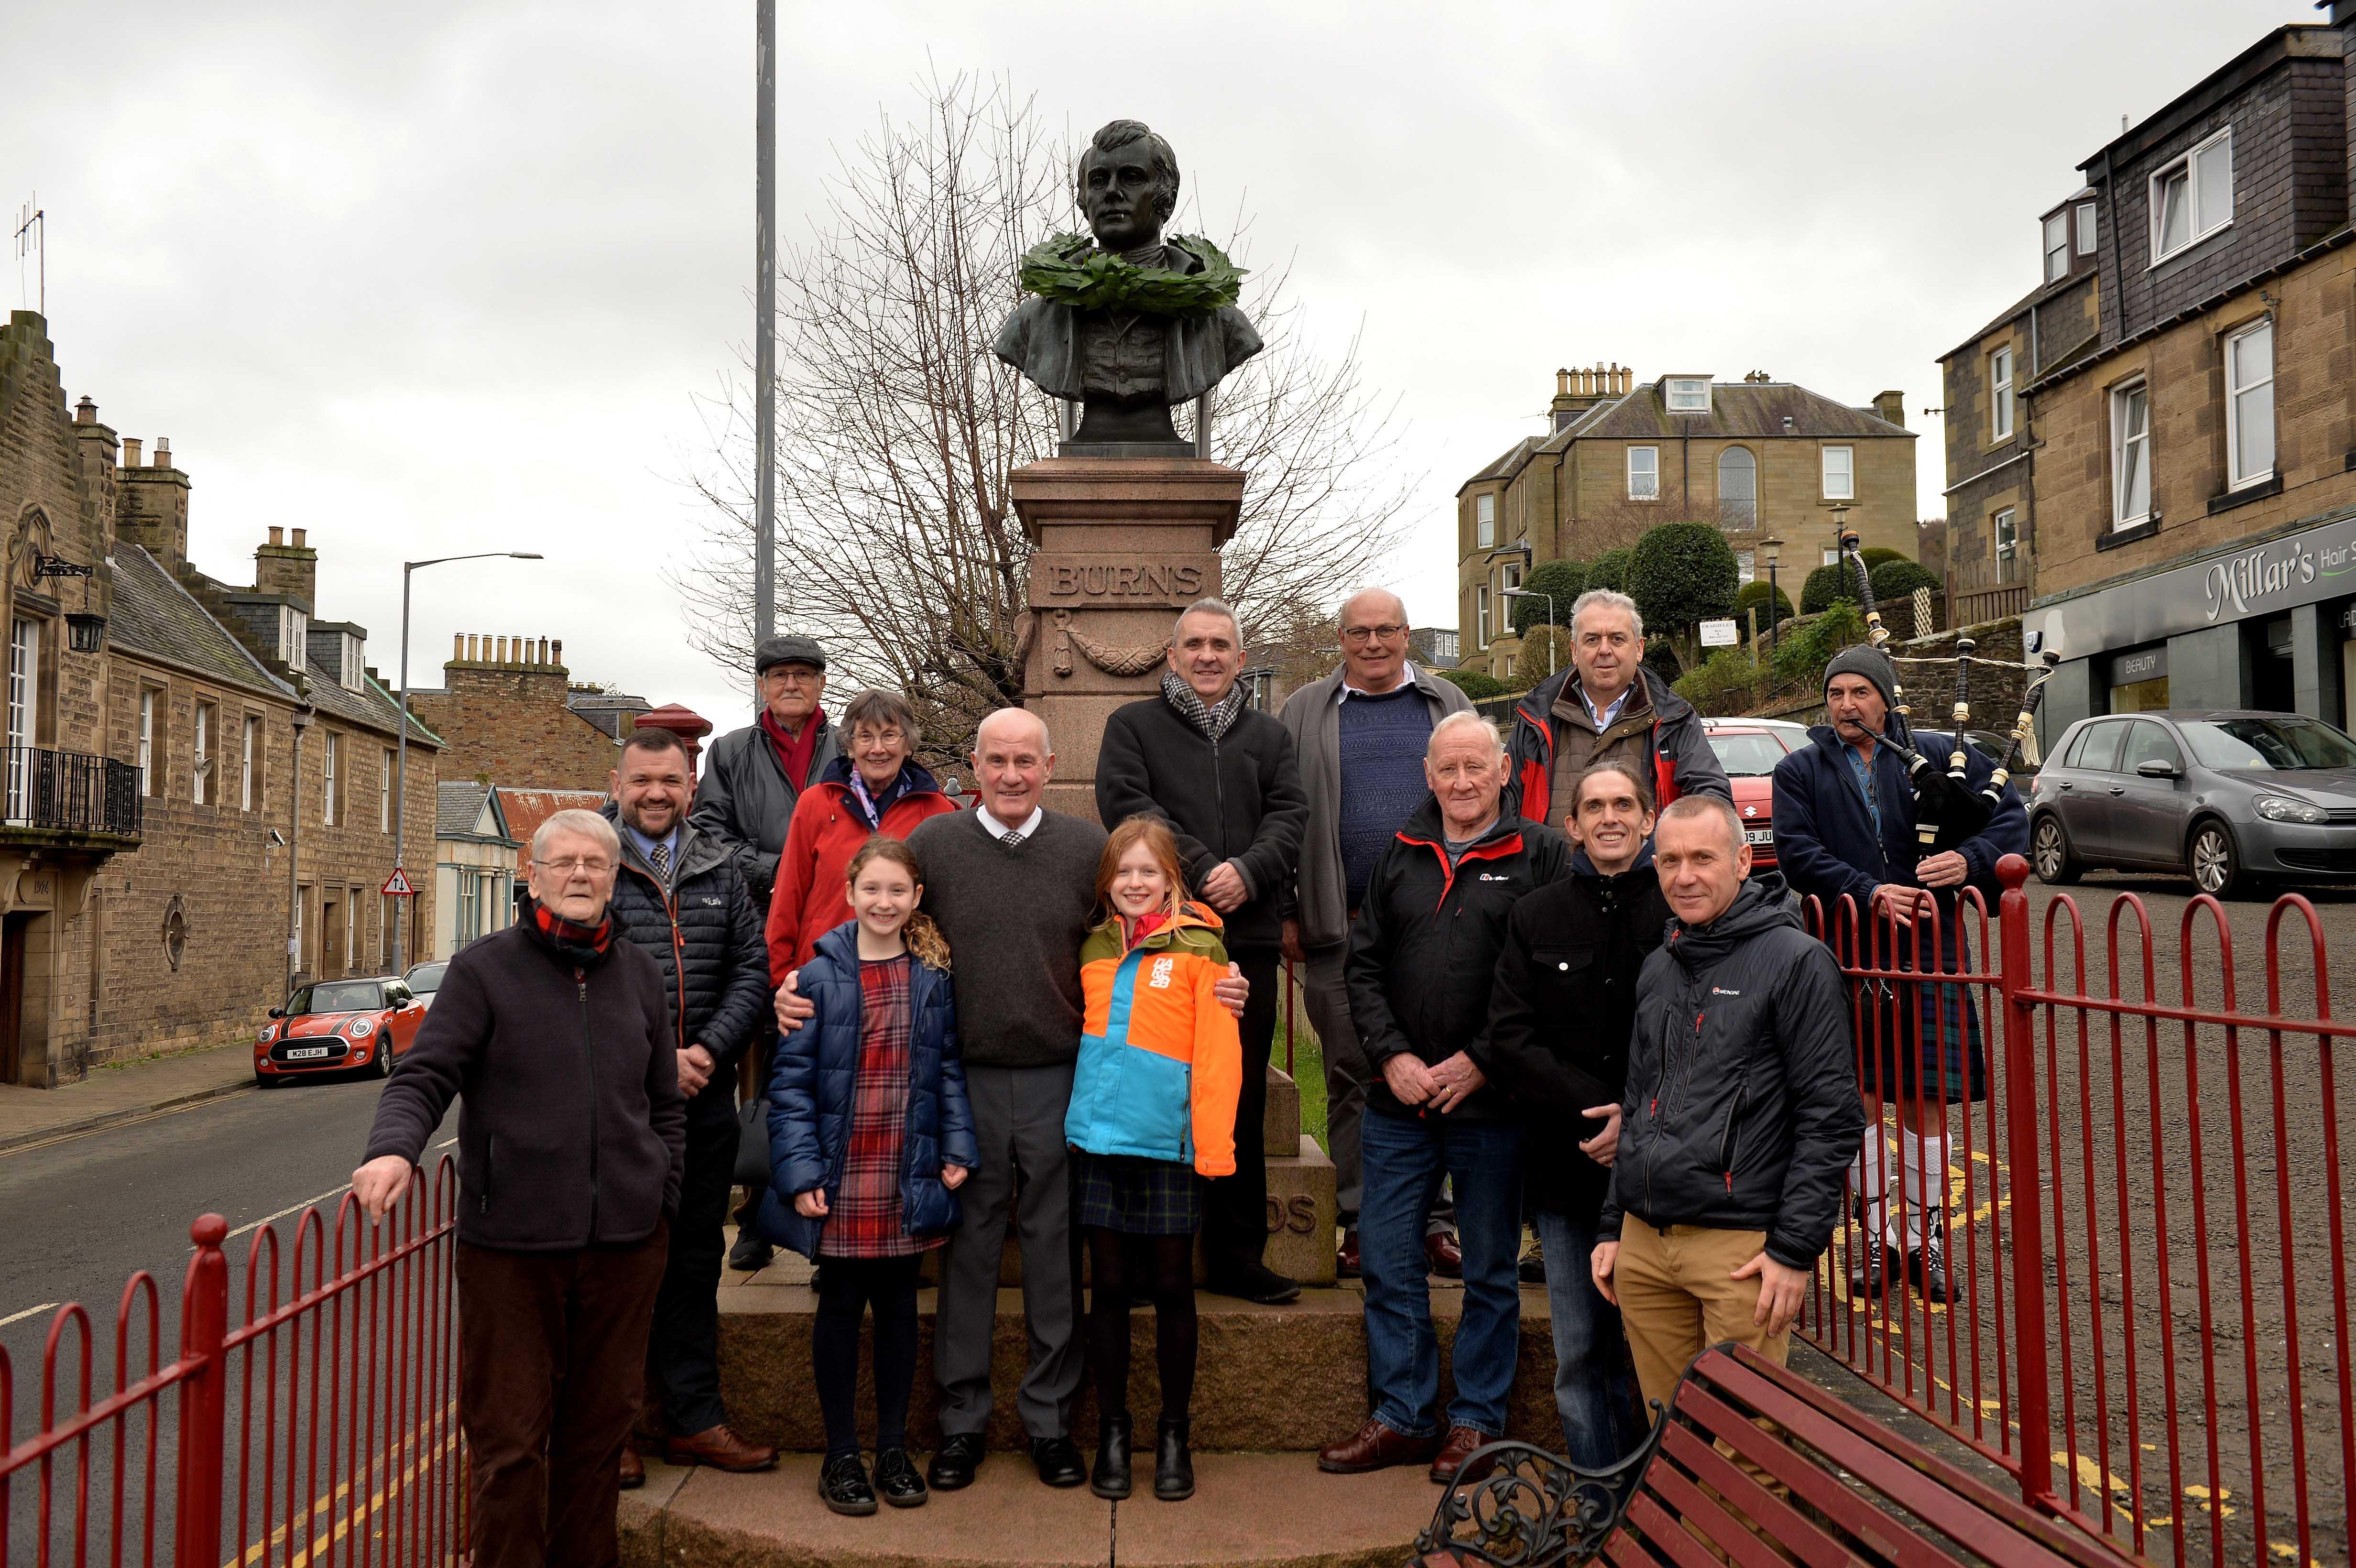 Members of the club at the Burns bust, located outside the town's library.